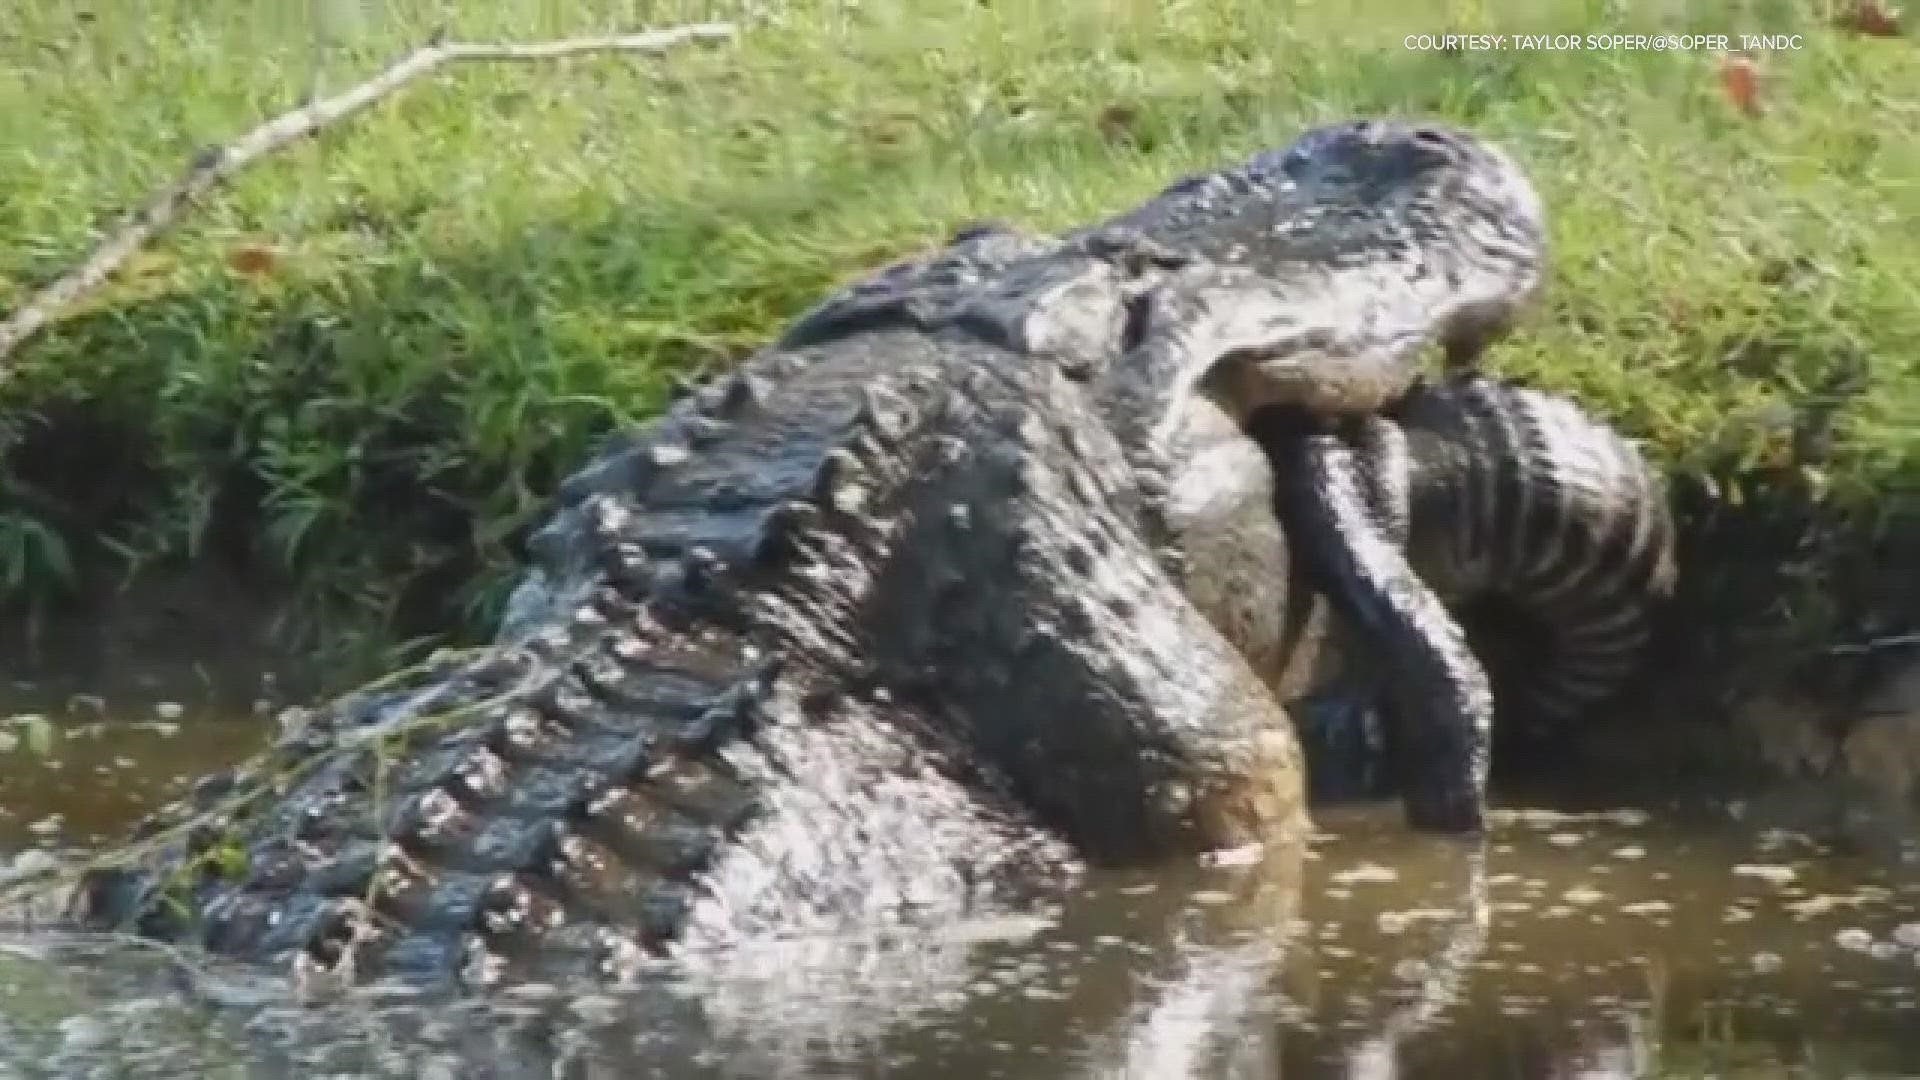 A South Carolina man captured incredible video of a massive alligator eating another gator.